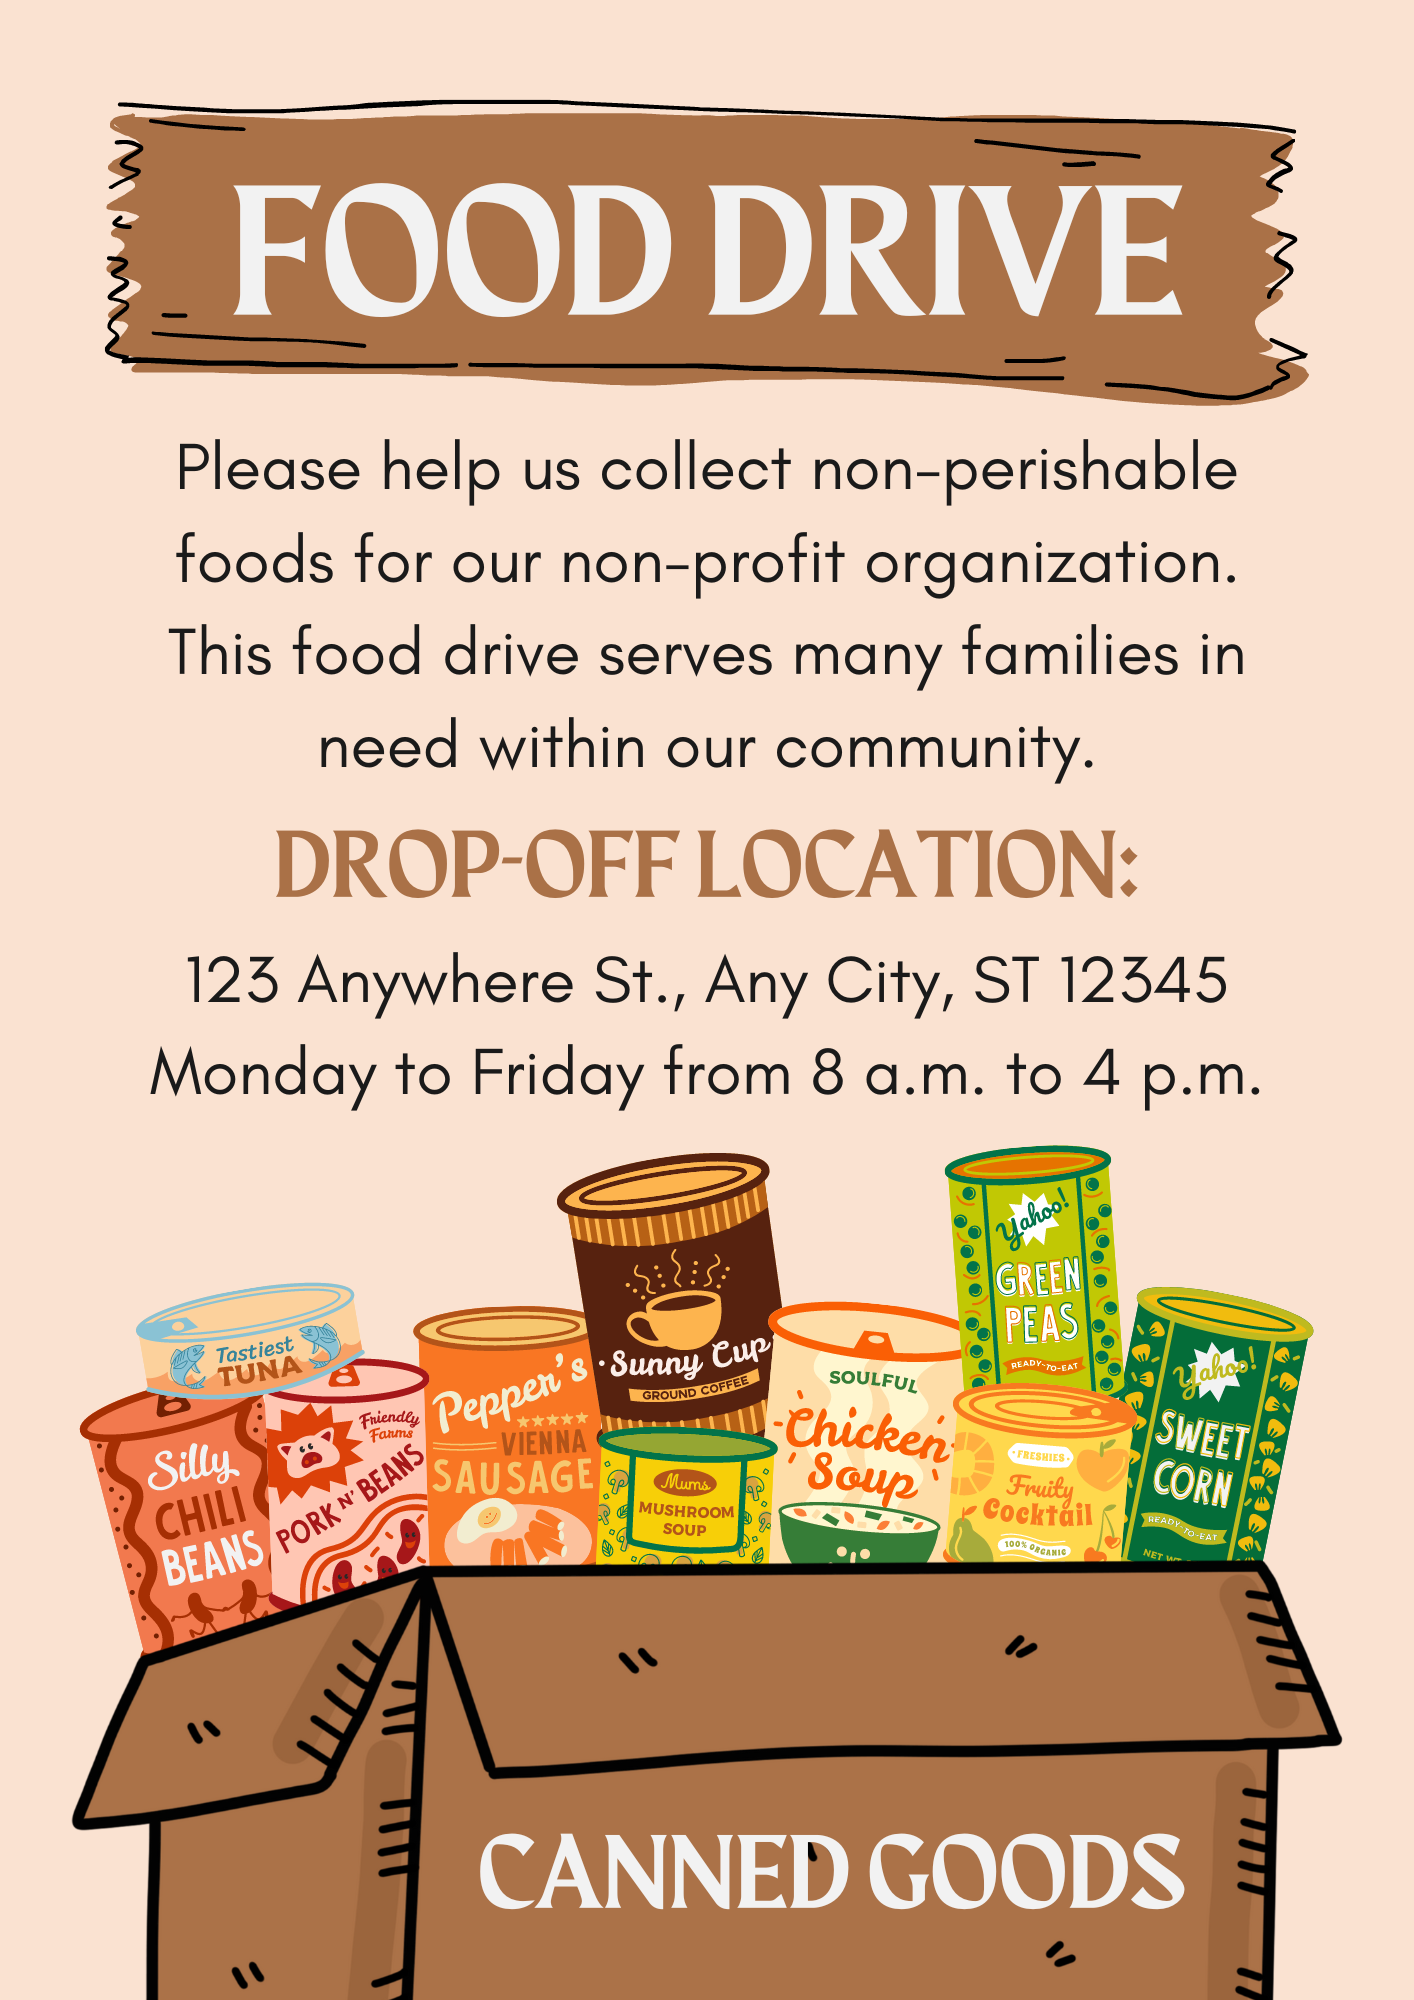 Flyer 9 - Brown Orange Yellow Green Colorful Illustration Creative Food Drive Flyer.png